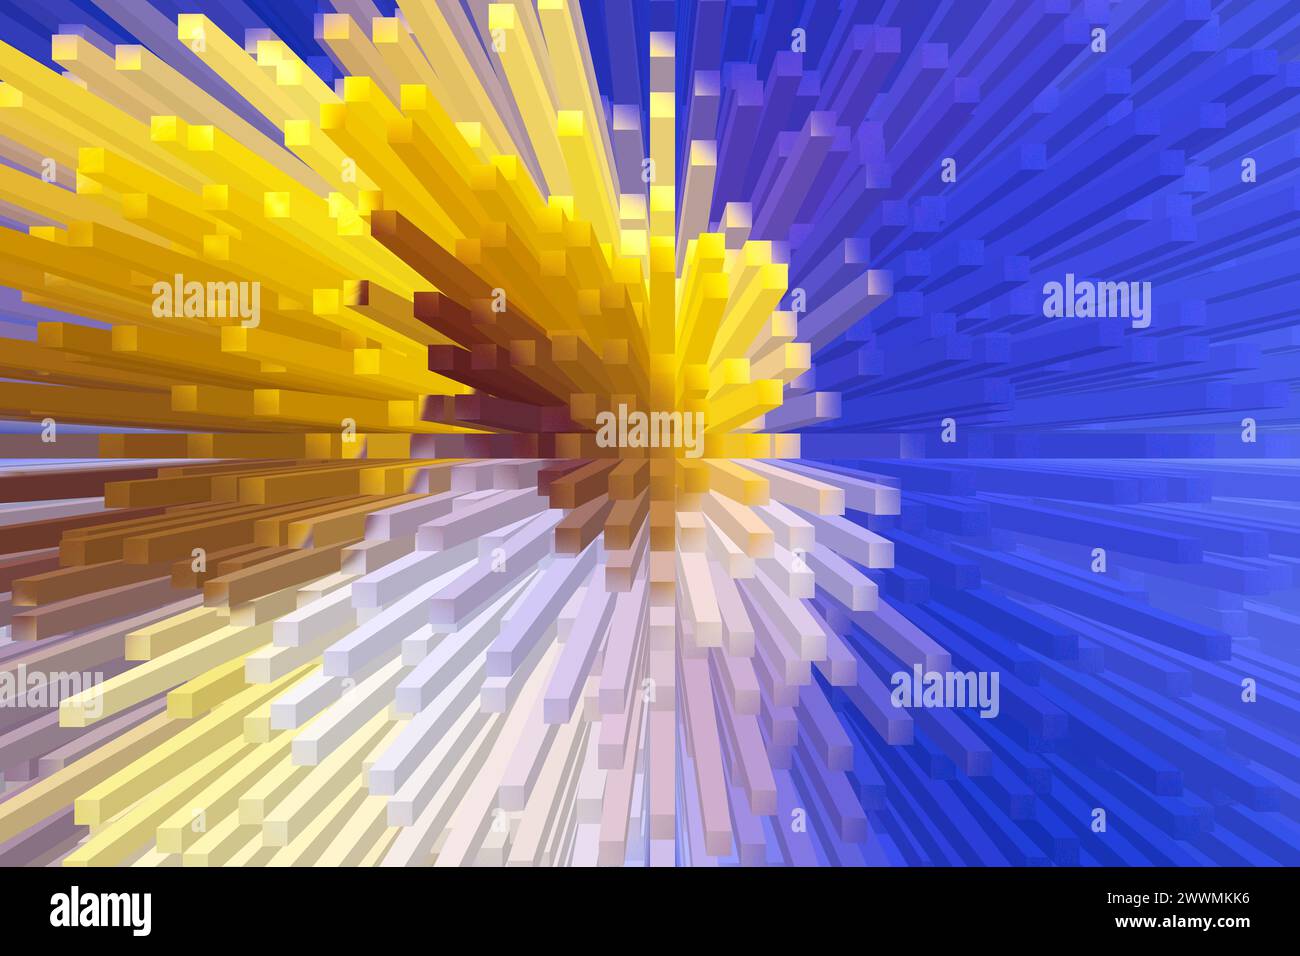 Blue and yellow abstract colored extrusion blocks and pyramids rushing in different directions. Growth, business, technology. Background Stock Photo